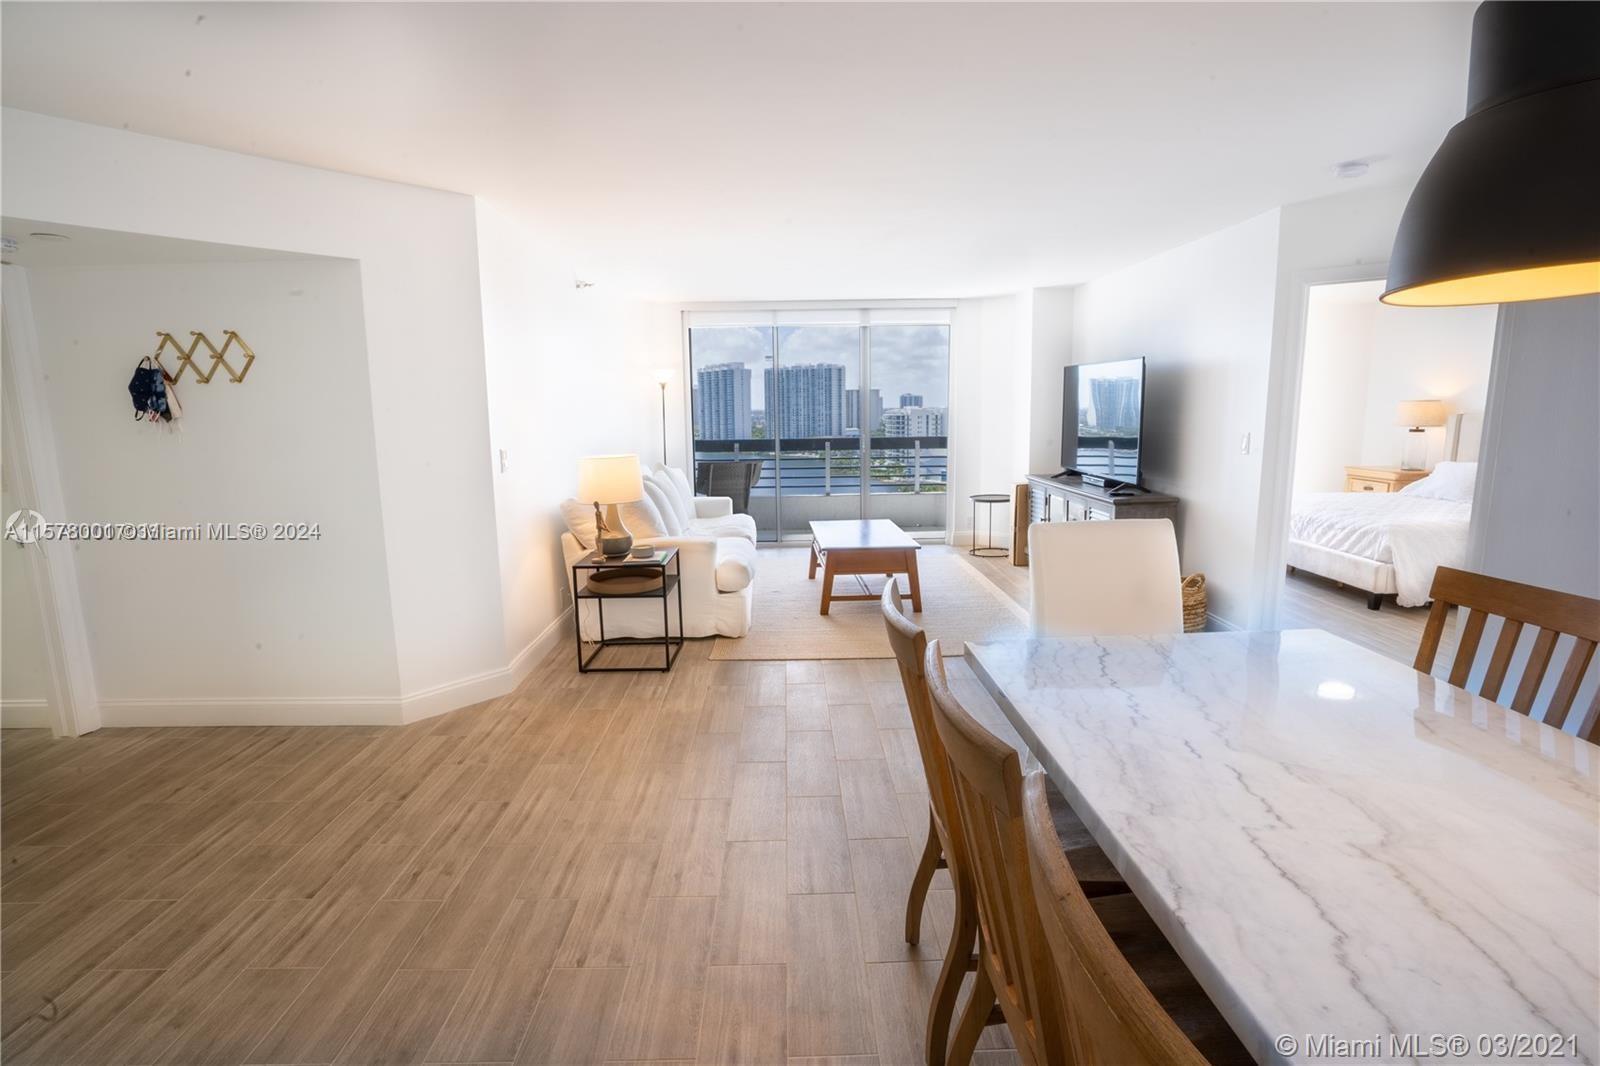 Beautiful 2 bed and 2 bath apartment with amazing 180 degrees views from the 19th floor overlooking 